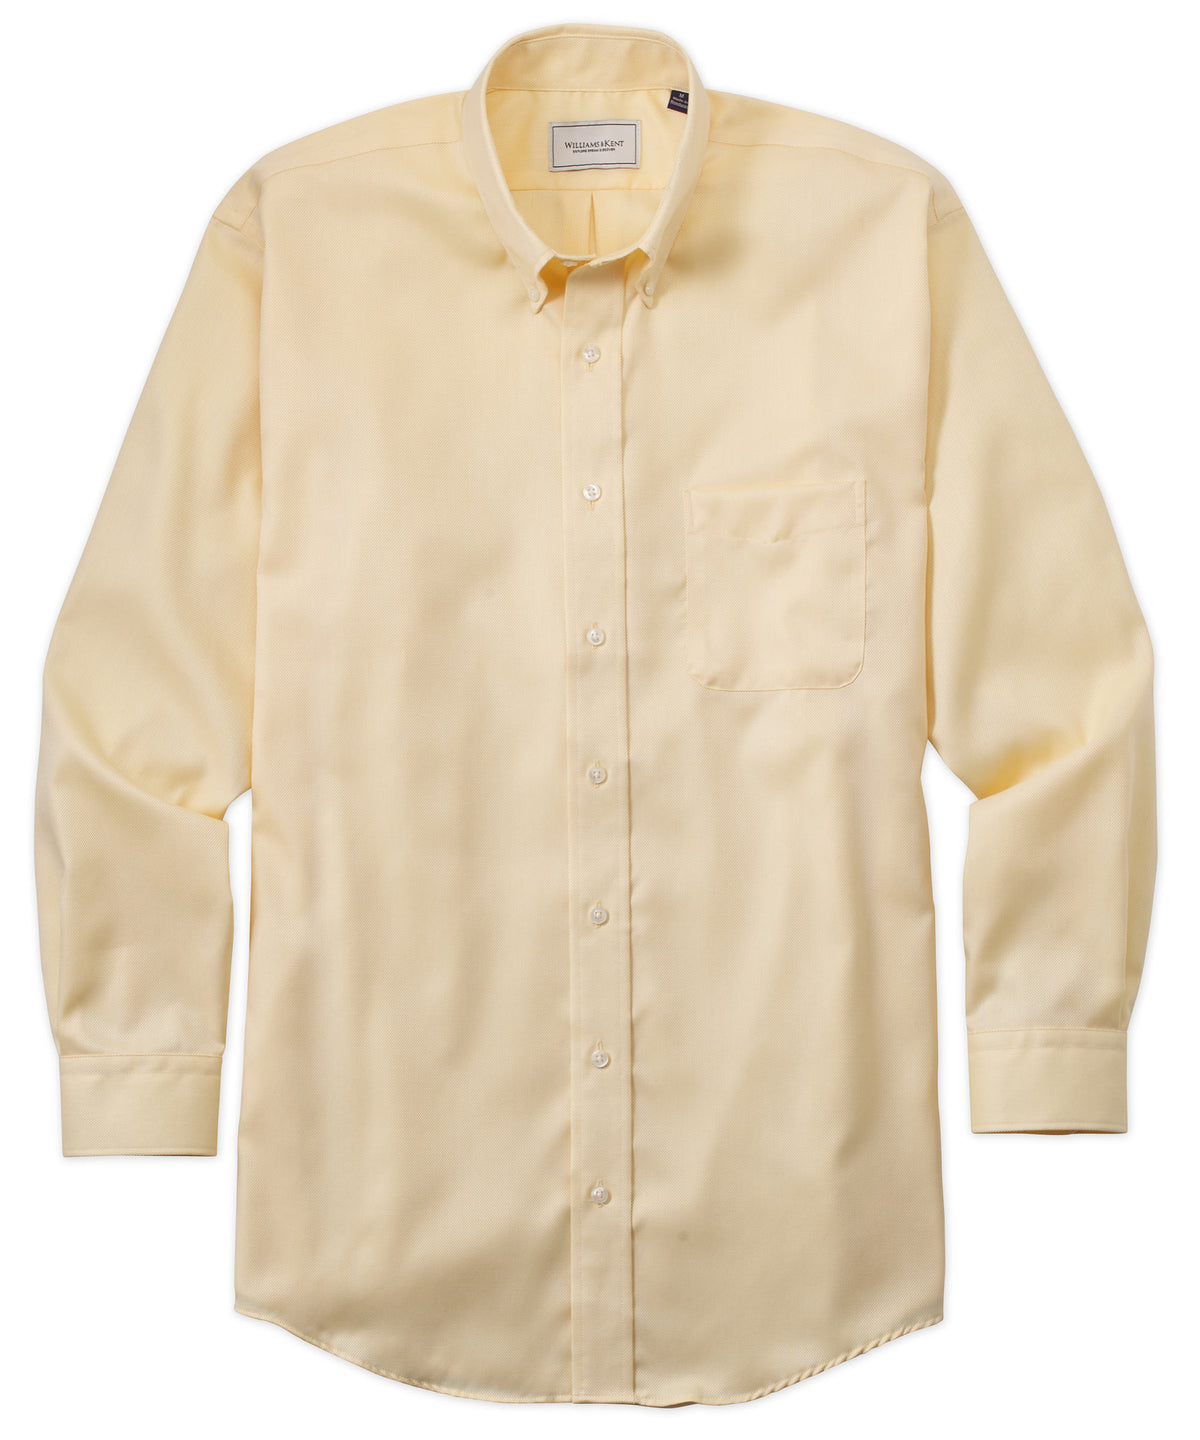 Non-Iron Pinpoint Solid Sport Shirt